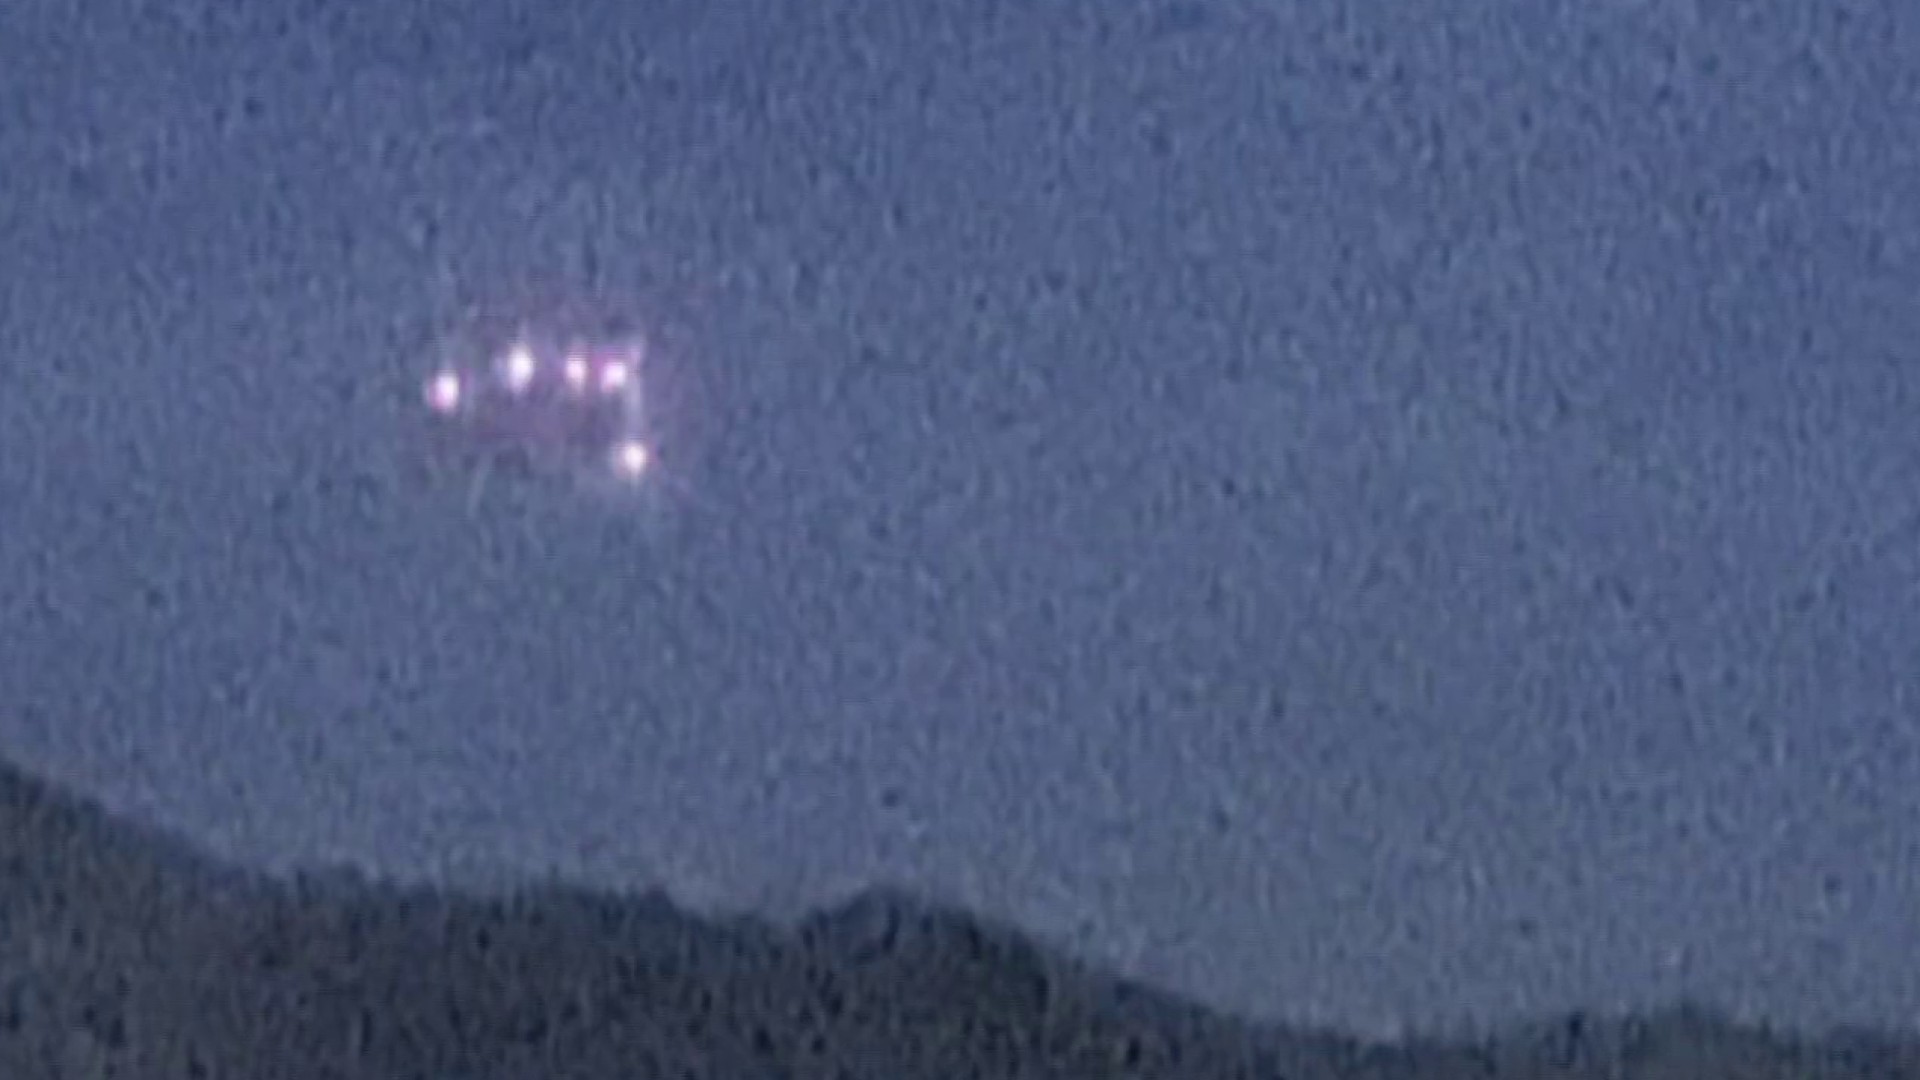 The truth is out there? Investigating mystery triangle UFO spotted above U.S. marine base